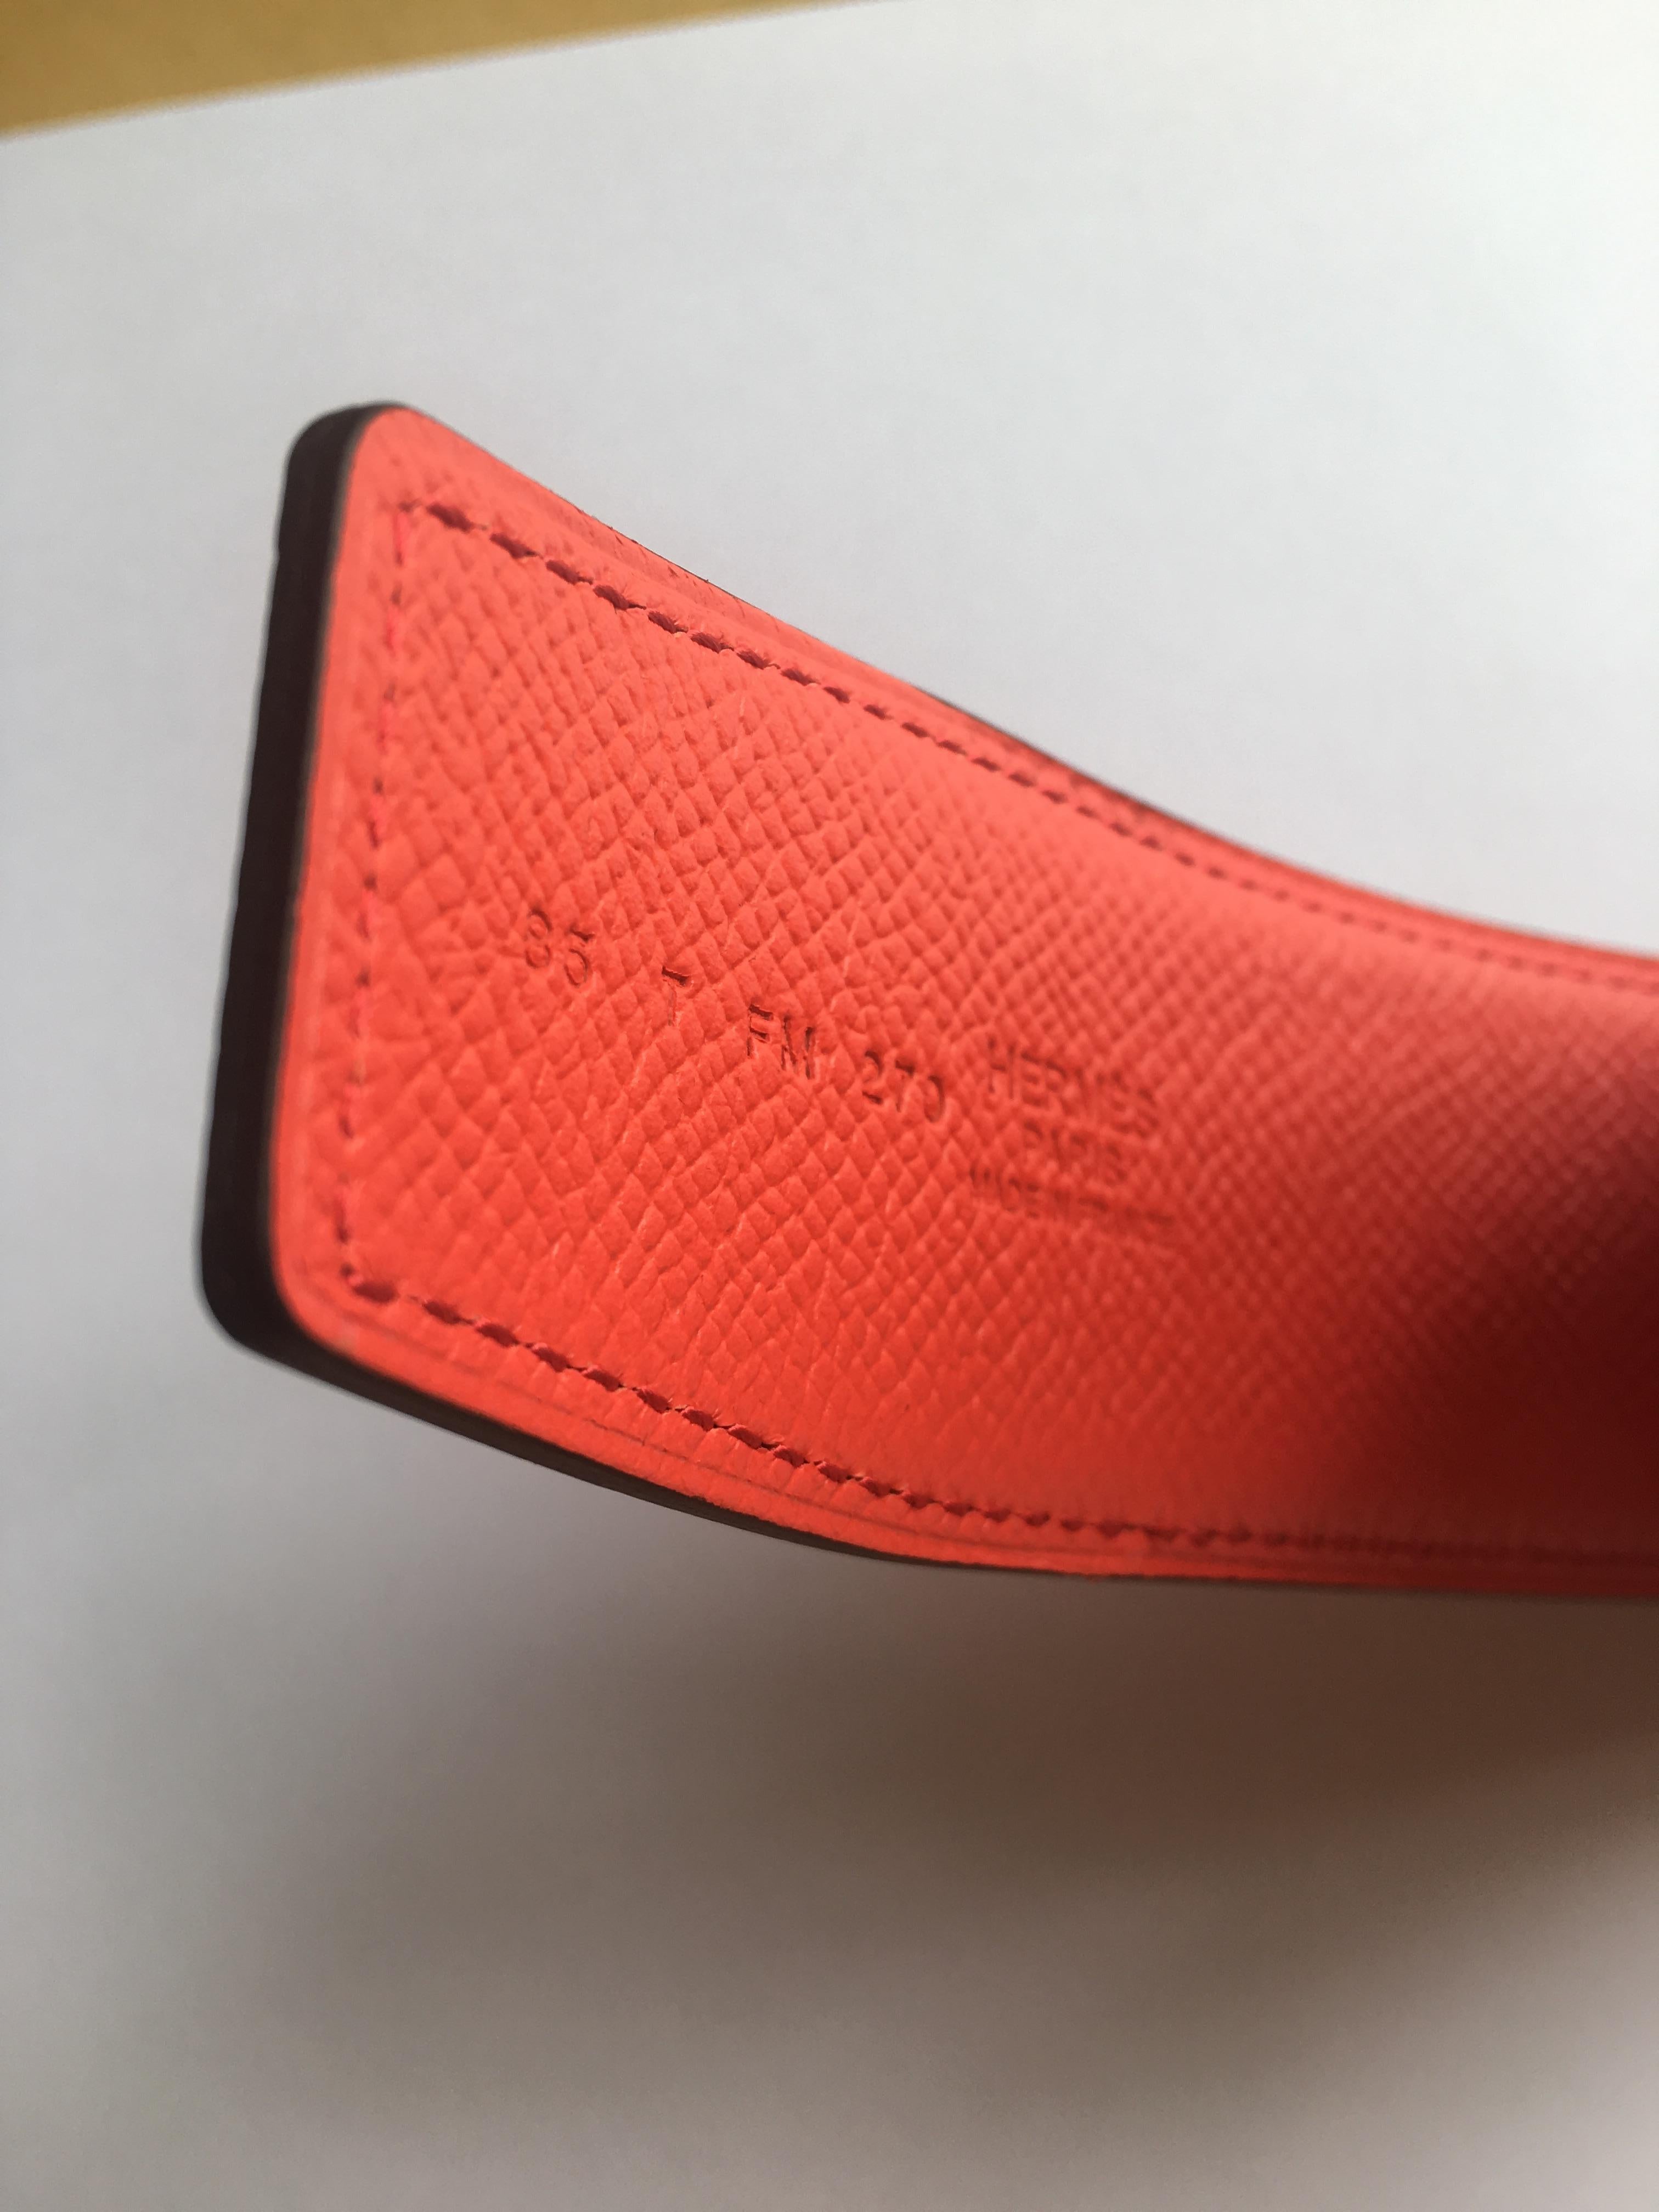 This classic Hermes H belt in reversible Rouge Casaque and Rose Jaipur Epsom leather with the buckle in Gold is brand new with plastic on the hardware and comes with the box.
Width: 42mm
Length: 85cm or 90cm
